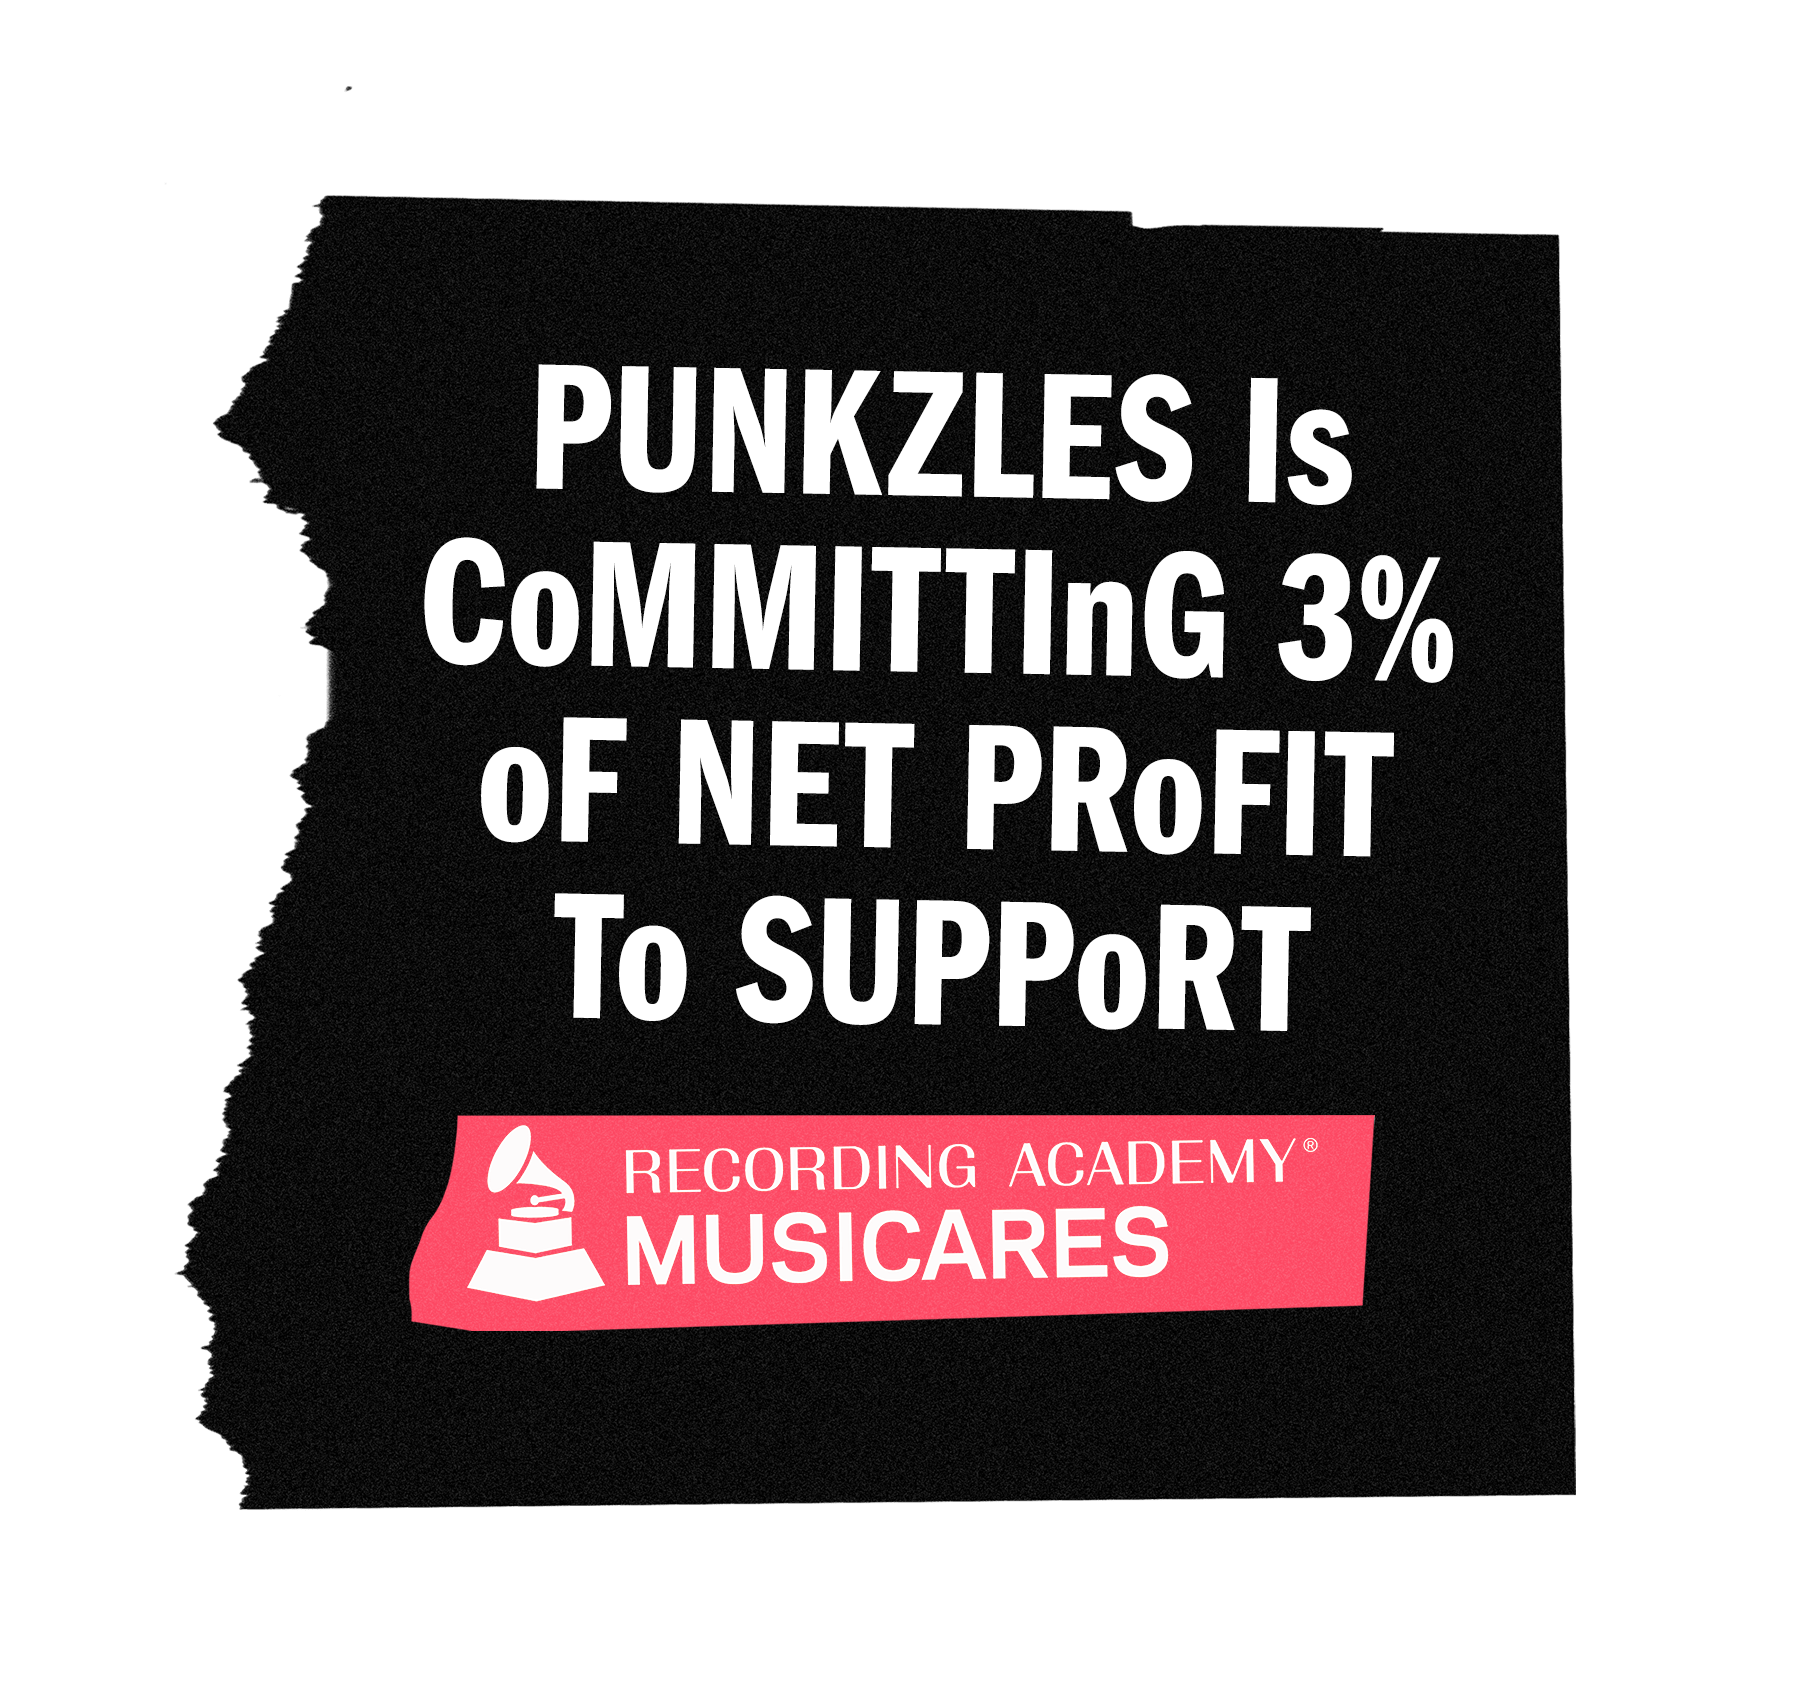 Punkzles is committing 3% of net profit to support Musicares recording academy